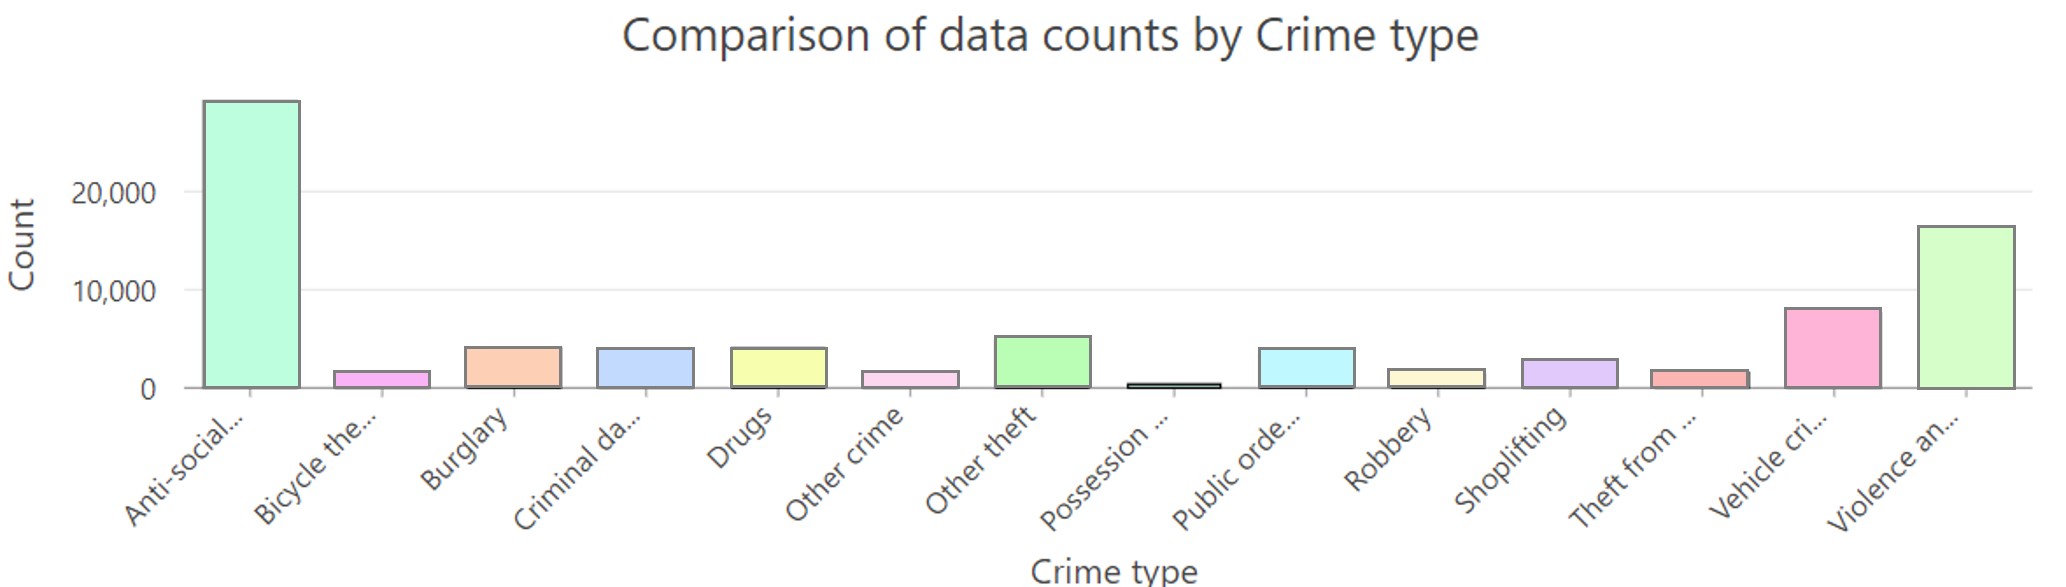 A chart showing the data counts for each crime type. Anti-social behaviour and Violence and sexual offences are the most frequent crime types.